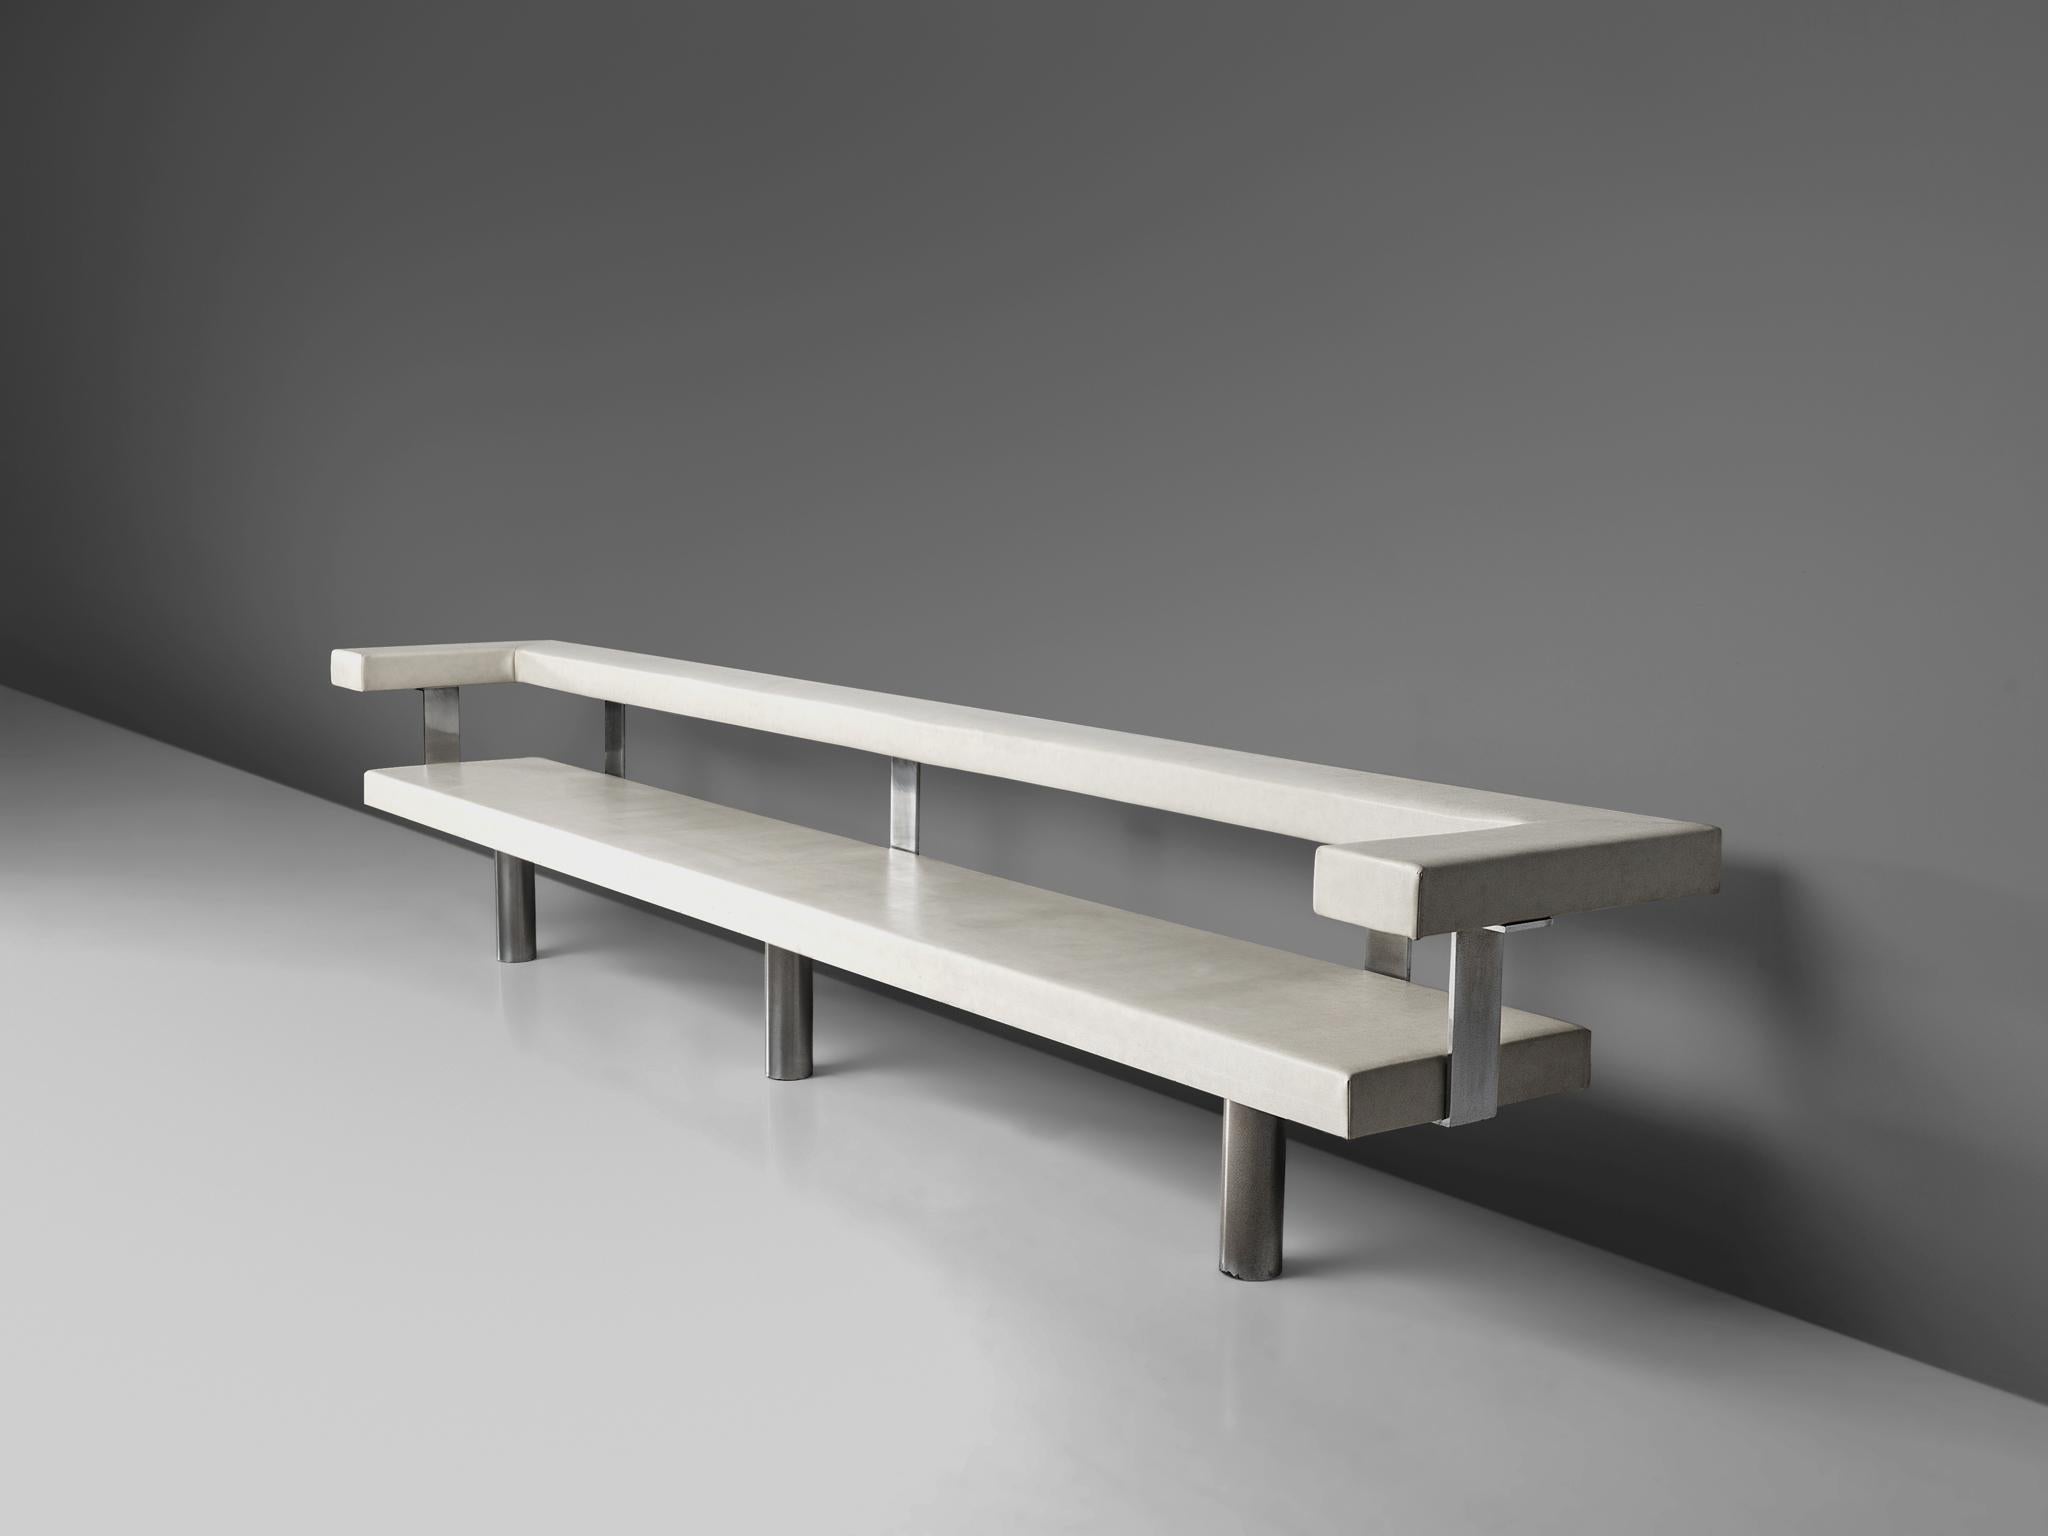 Gerrit Rietveld and interior designer J. Tricht, bench, faux-leather, metal, The Netherlands, 1965.

This bench was originally designed as a 'hall bench' for a local bank in Dedemsvaart, The Netherlands. J. Tricht was the interior decorator of this